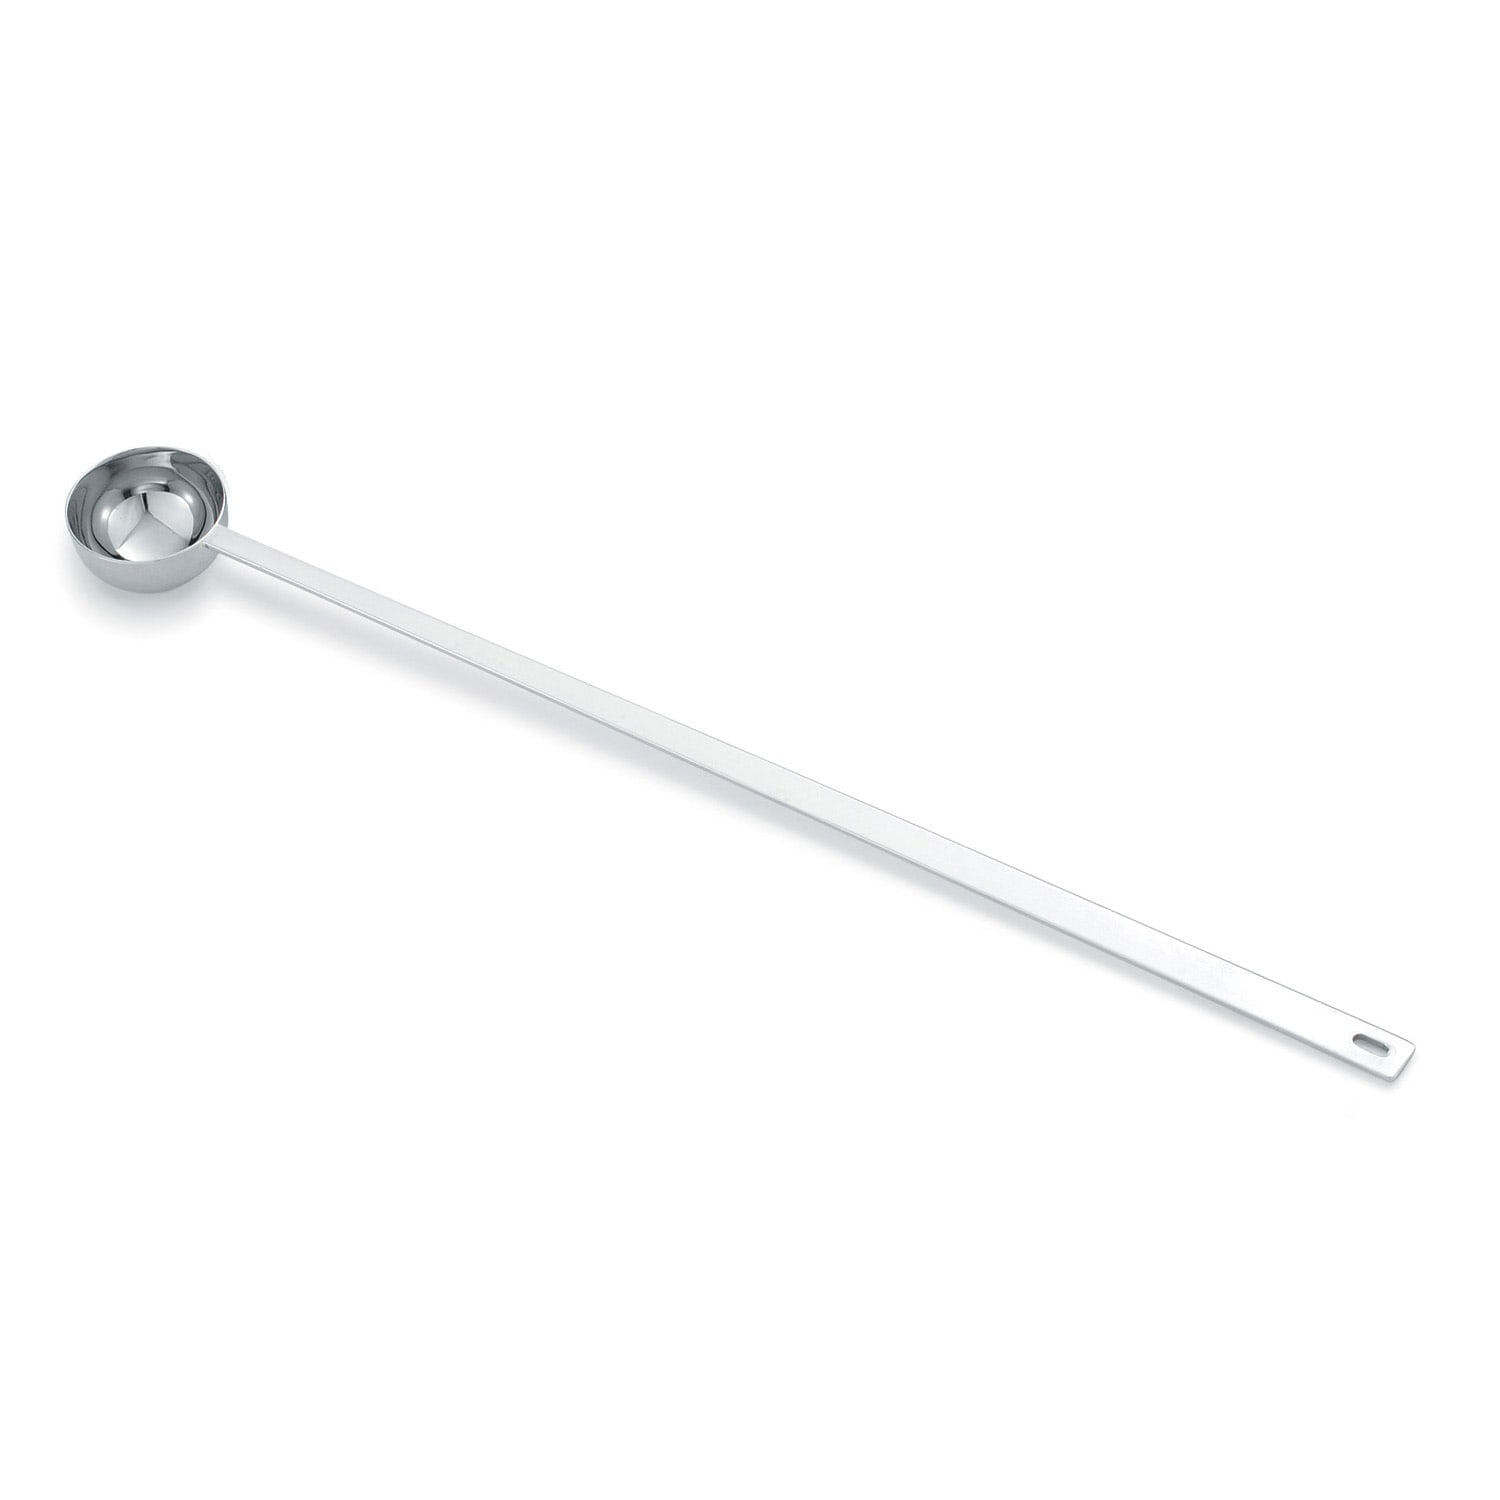 Scoop - 1 Tablespoon Measure with 6 Inch Long Handle - Prescribed For Life